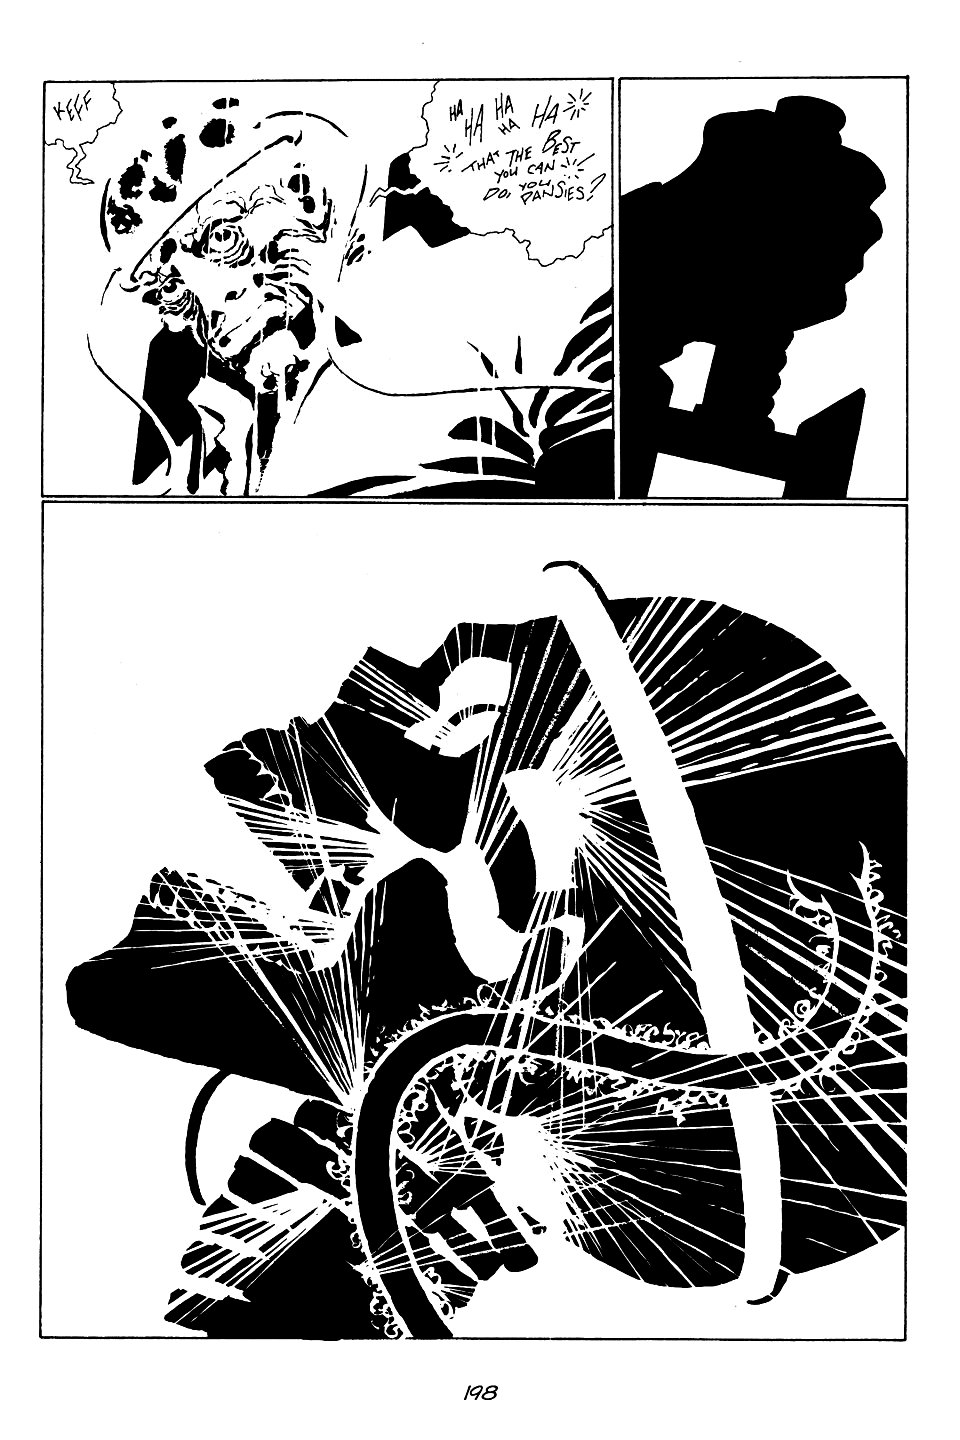 page 198 of sin city 1 the hard goodbye